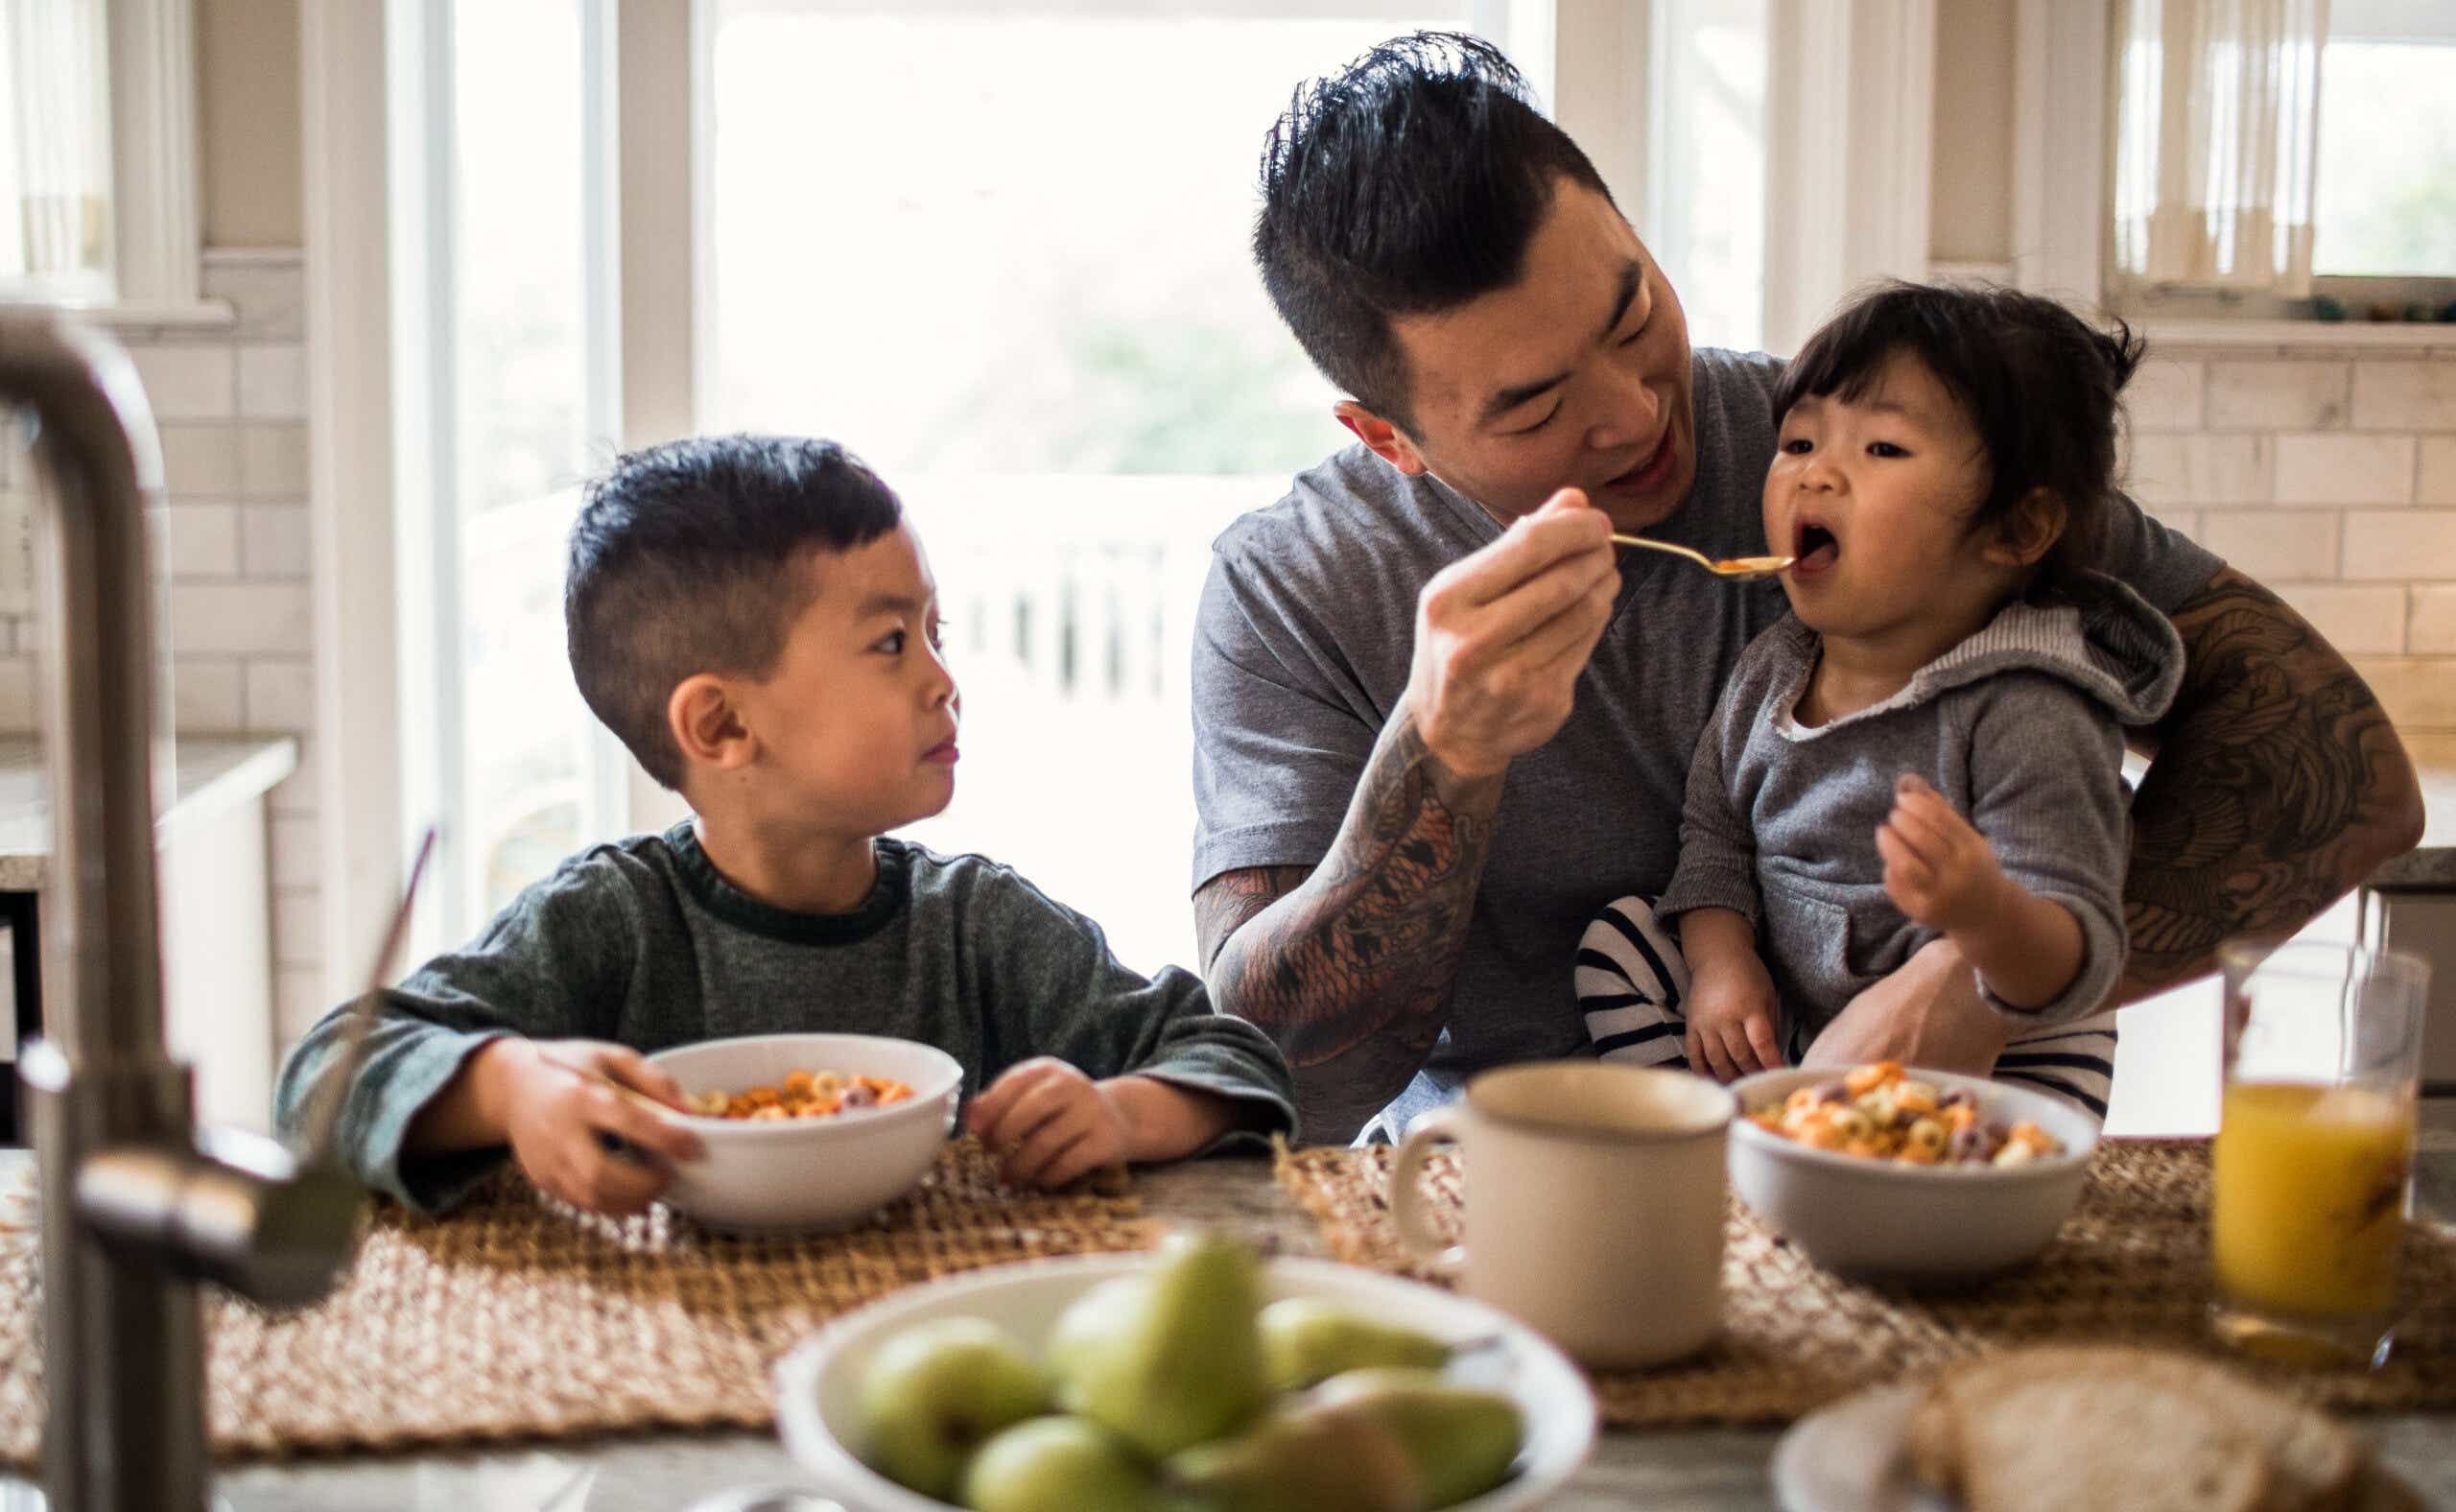 Dad feeding two small kids cereal